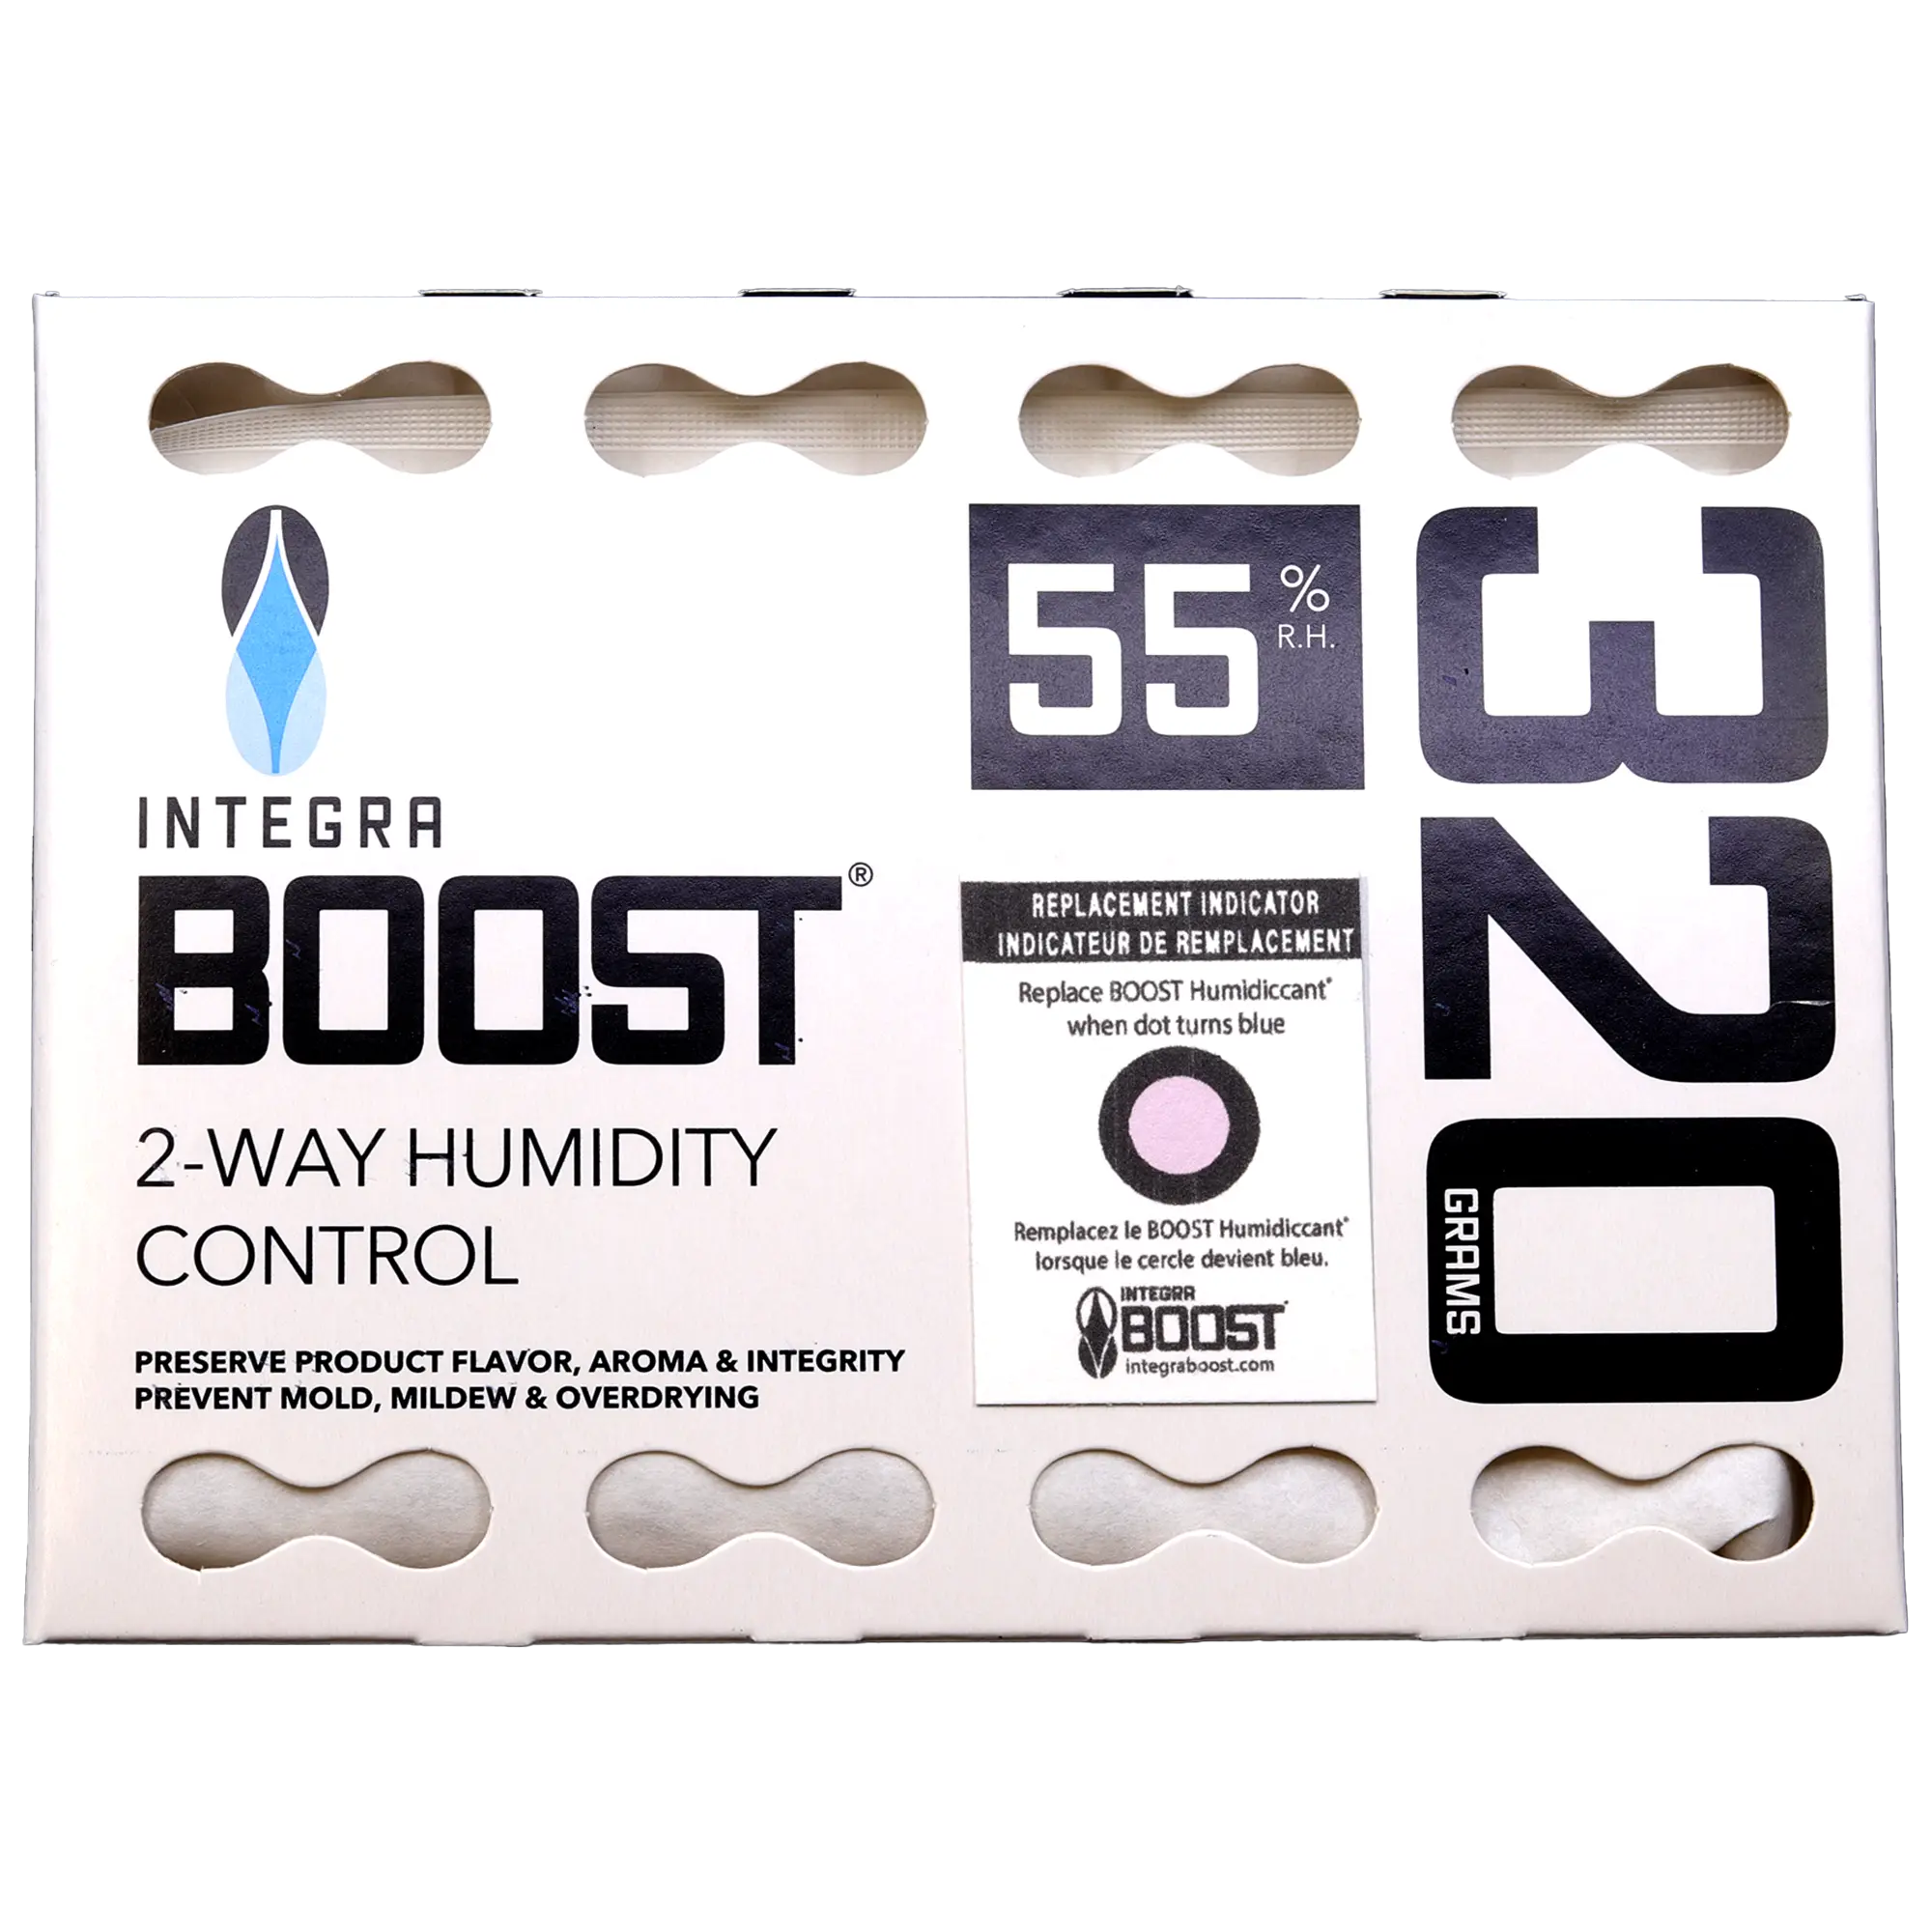 Integra Boost 320g Befeuchterpack 55% R.H.
